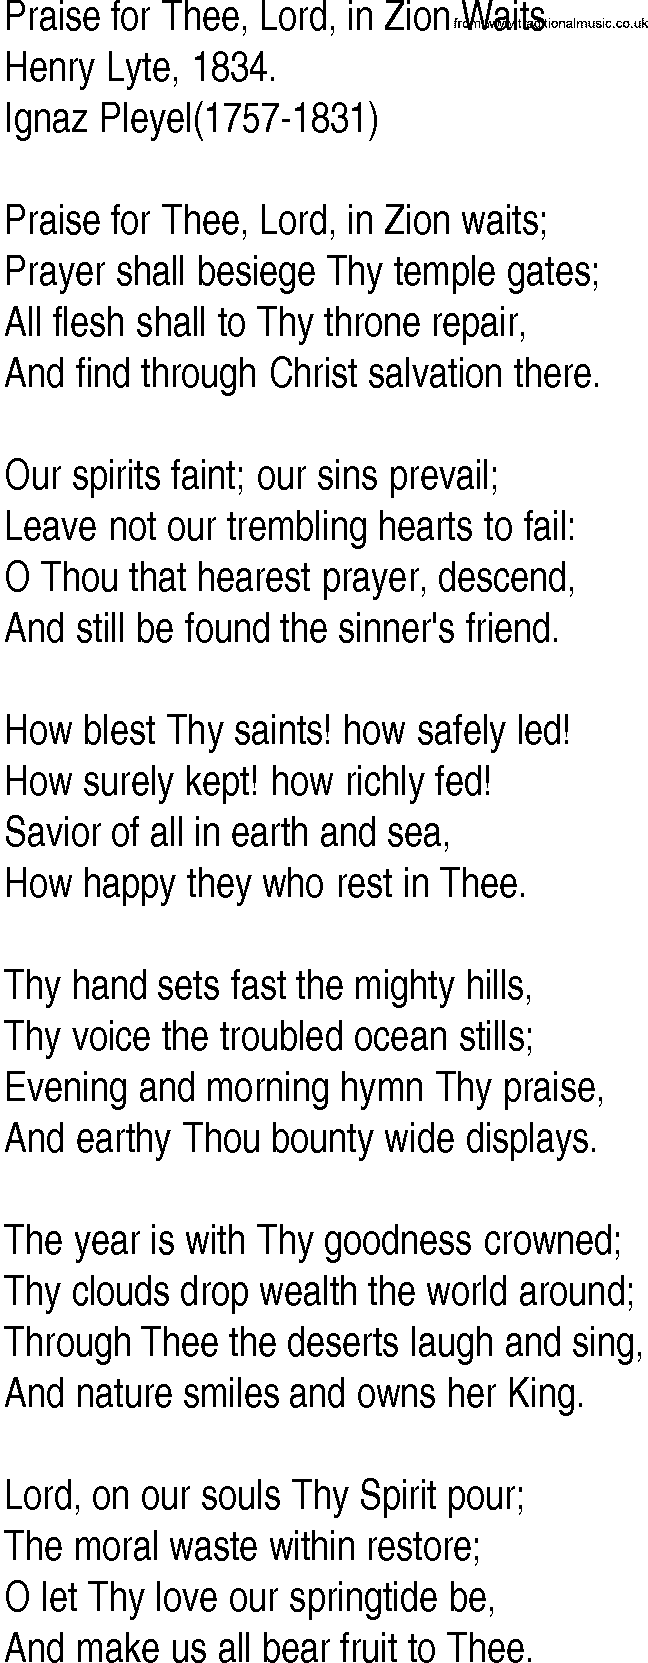 Hymn and Gospel Song: Praise for Thee, Lord, in Zion Waits by Henry Lyte lyrics